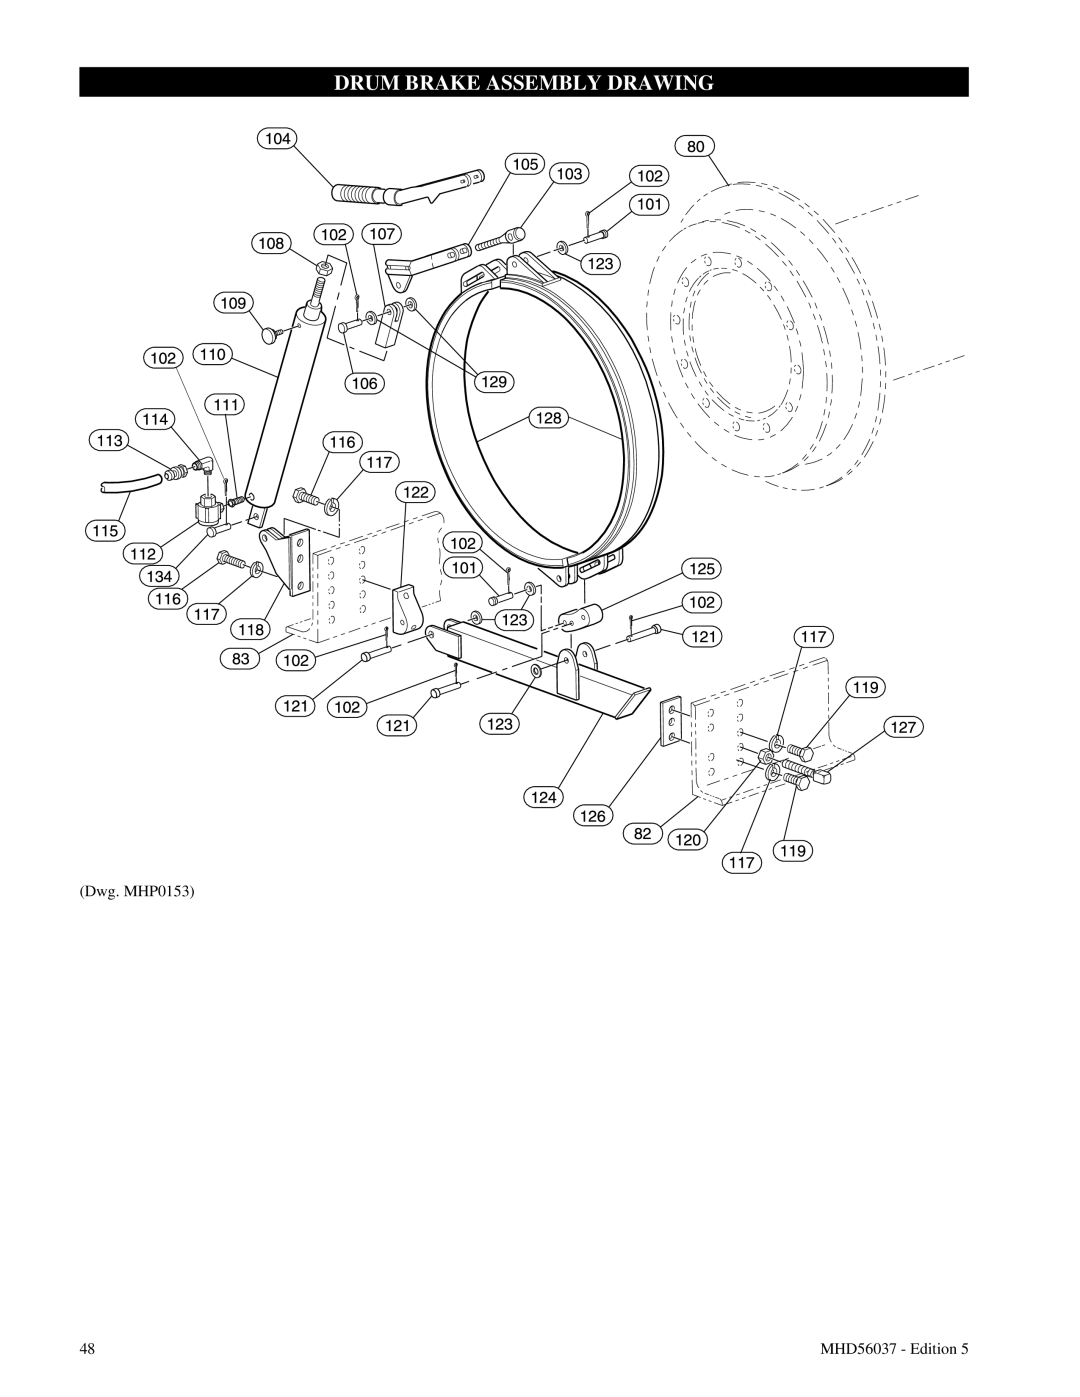 Ingersoll-Rand FA5T manual Drum Brake Assembly Drawing, Dwg. MHP0153, MHD56037 - Edition 